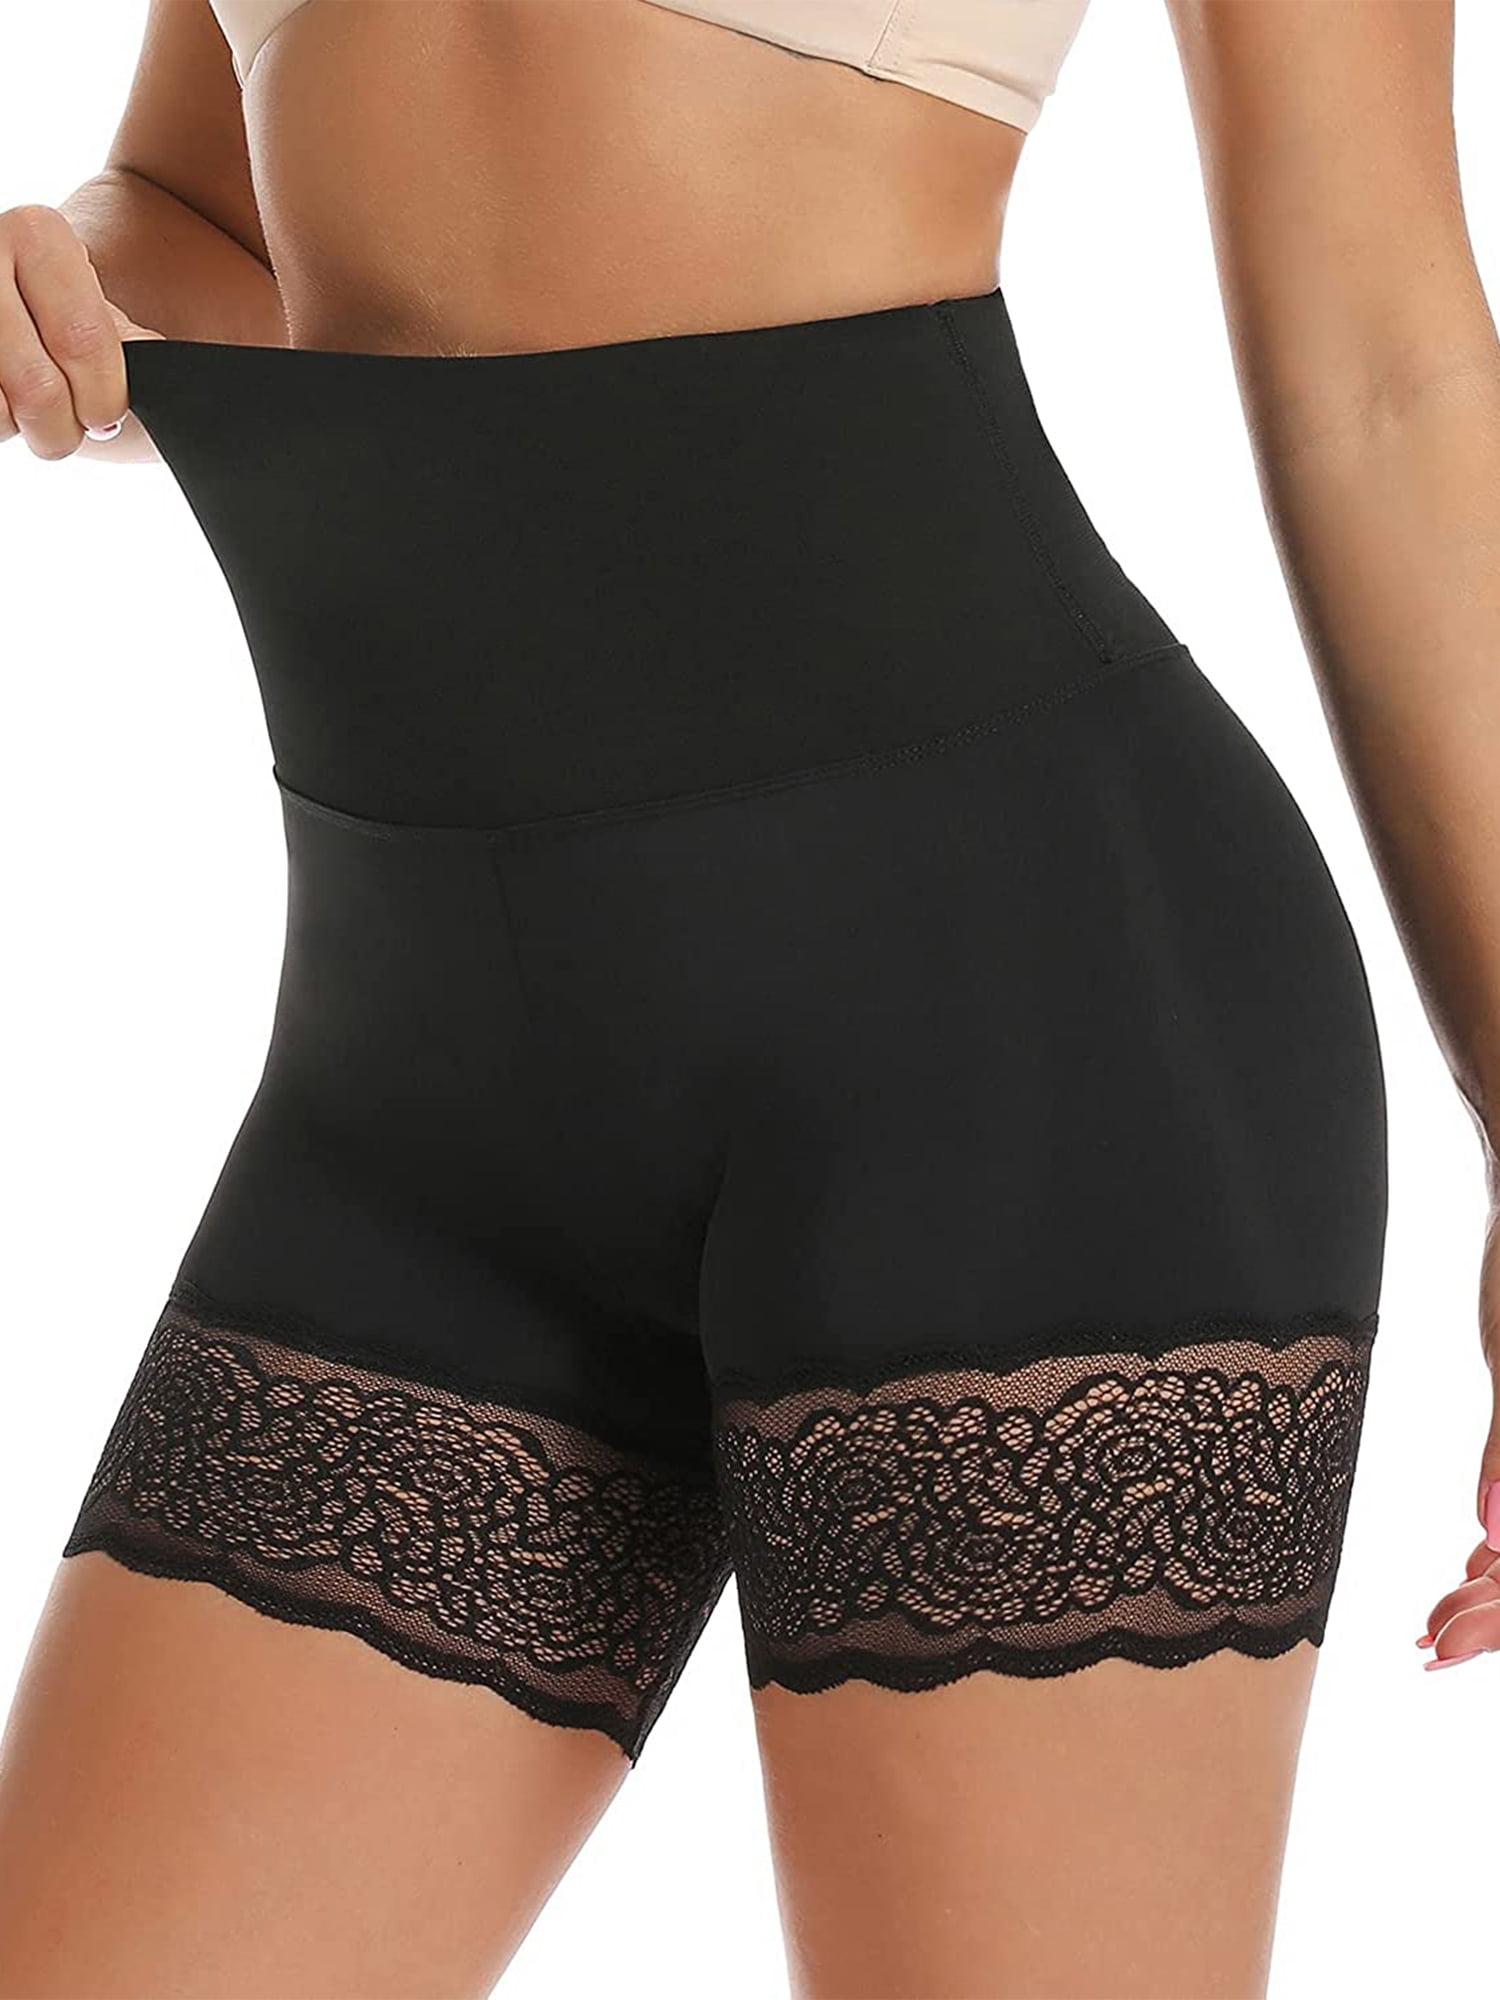 Anti Chafing Slip Shorts Women High Waist Safety Panty Invisible Under  Dress Seamless Underwear Cool Smooth Control Panties Black